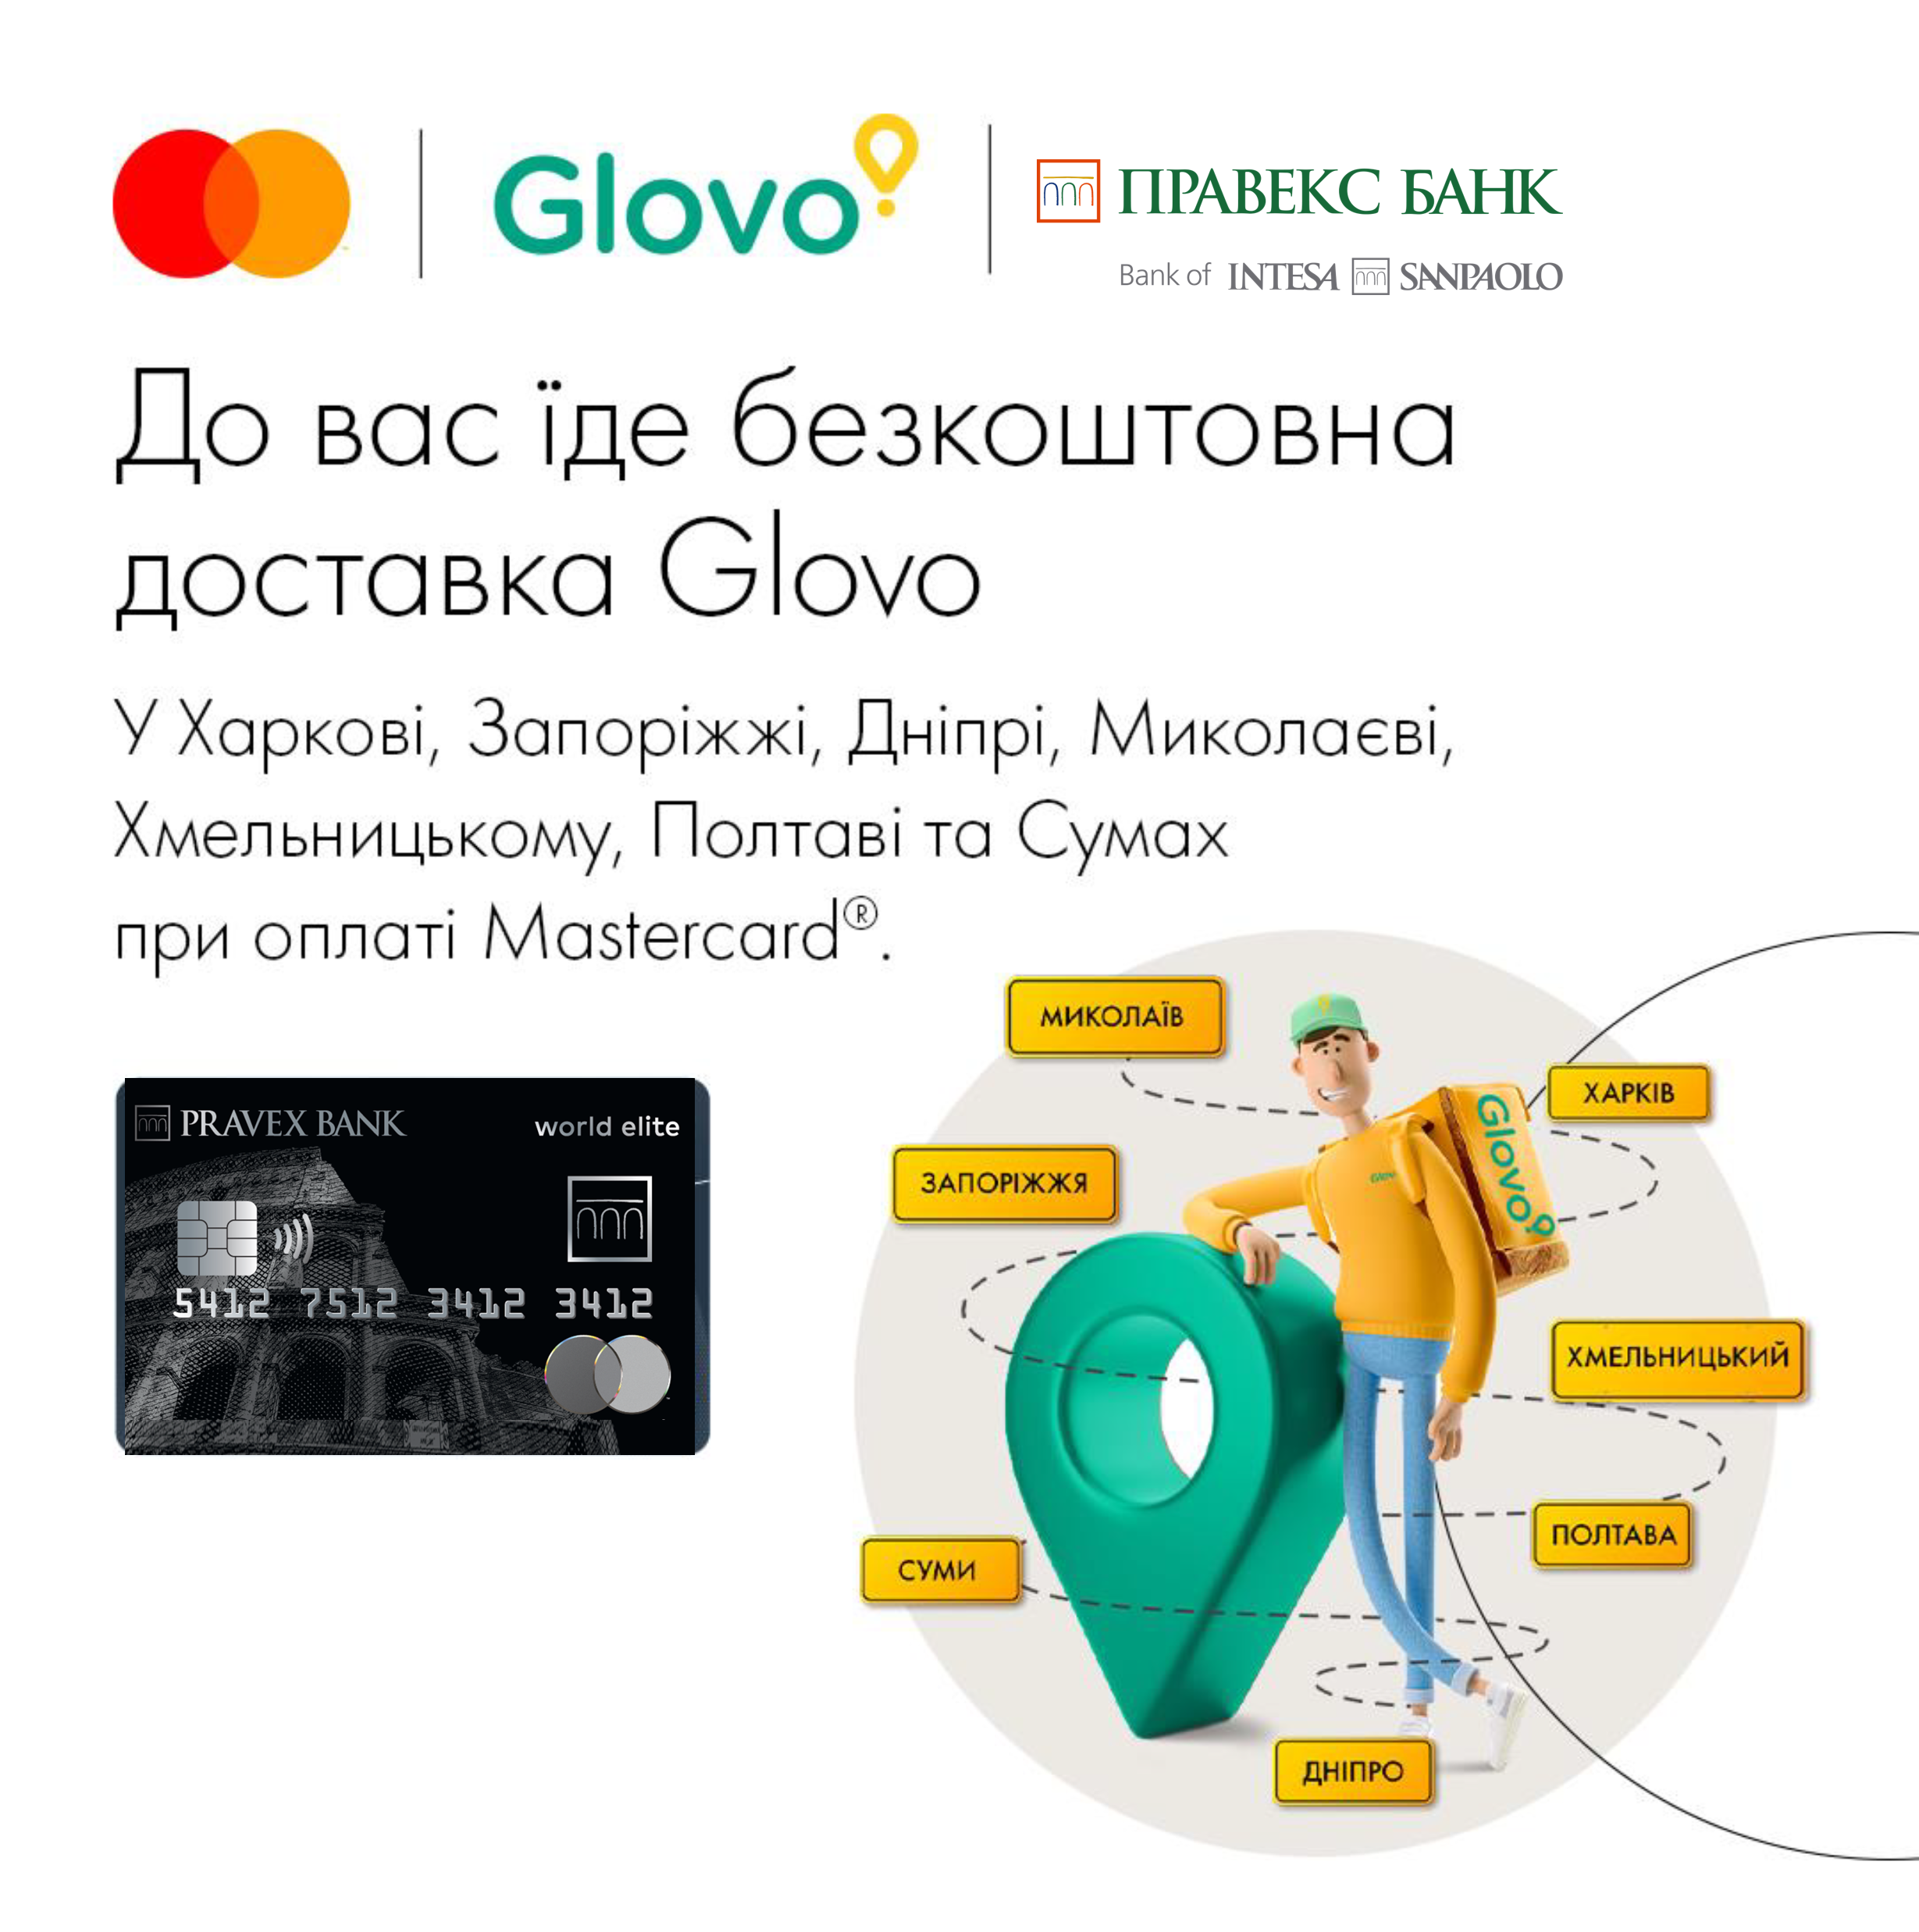 We are starting to love winter: because Mastercard and Glovo warm us with their support.